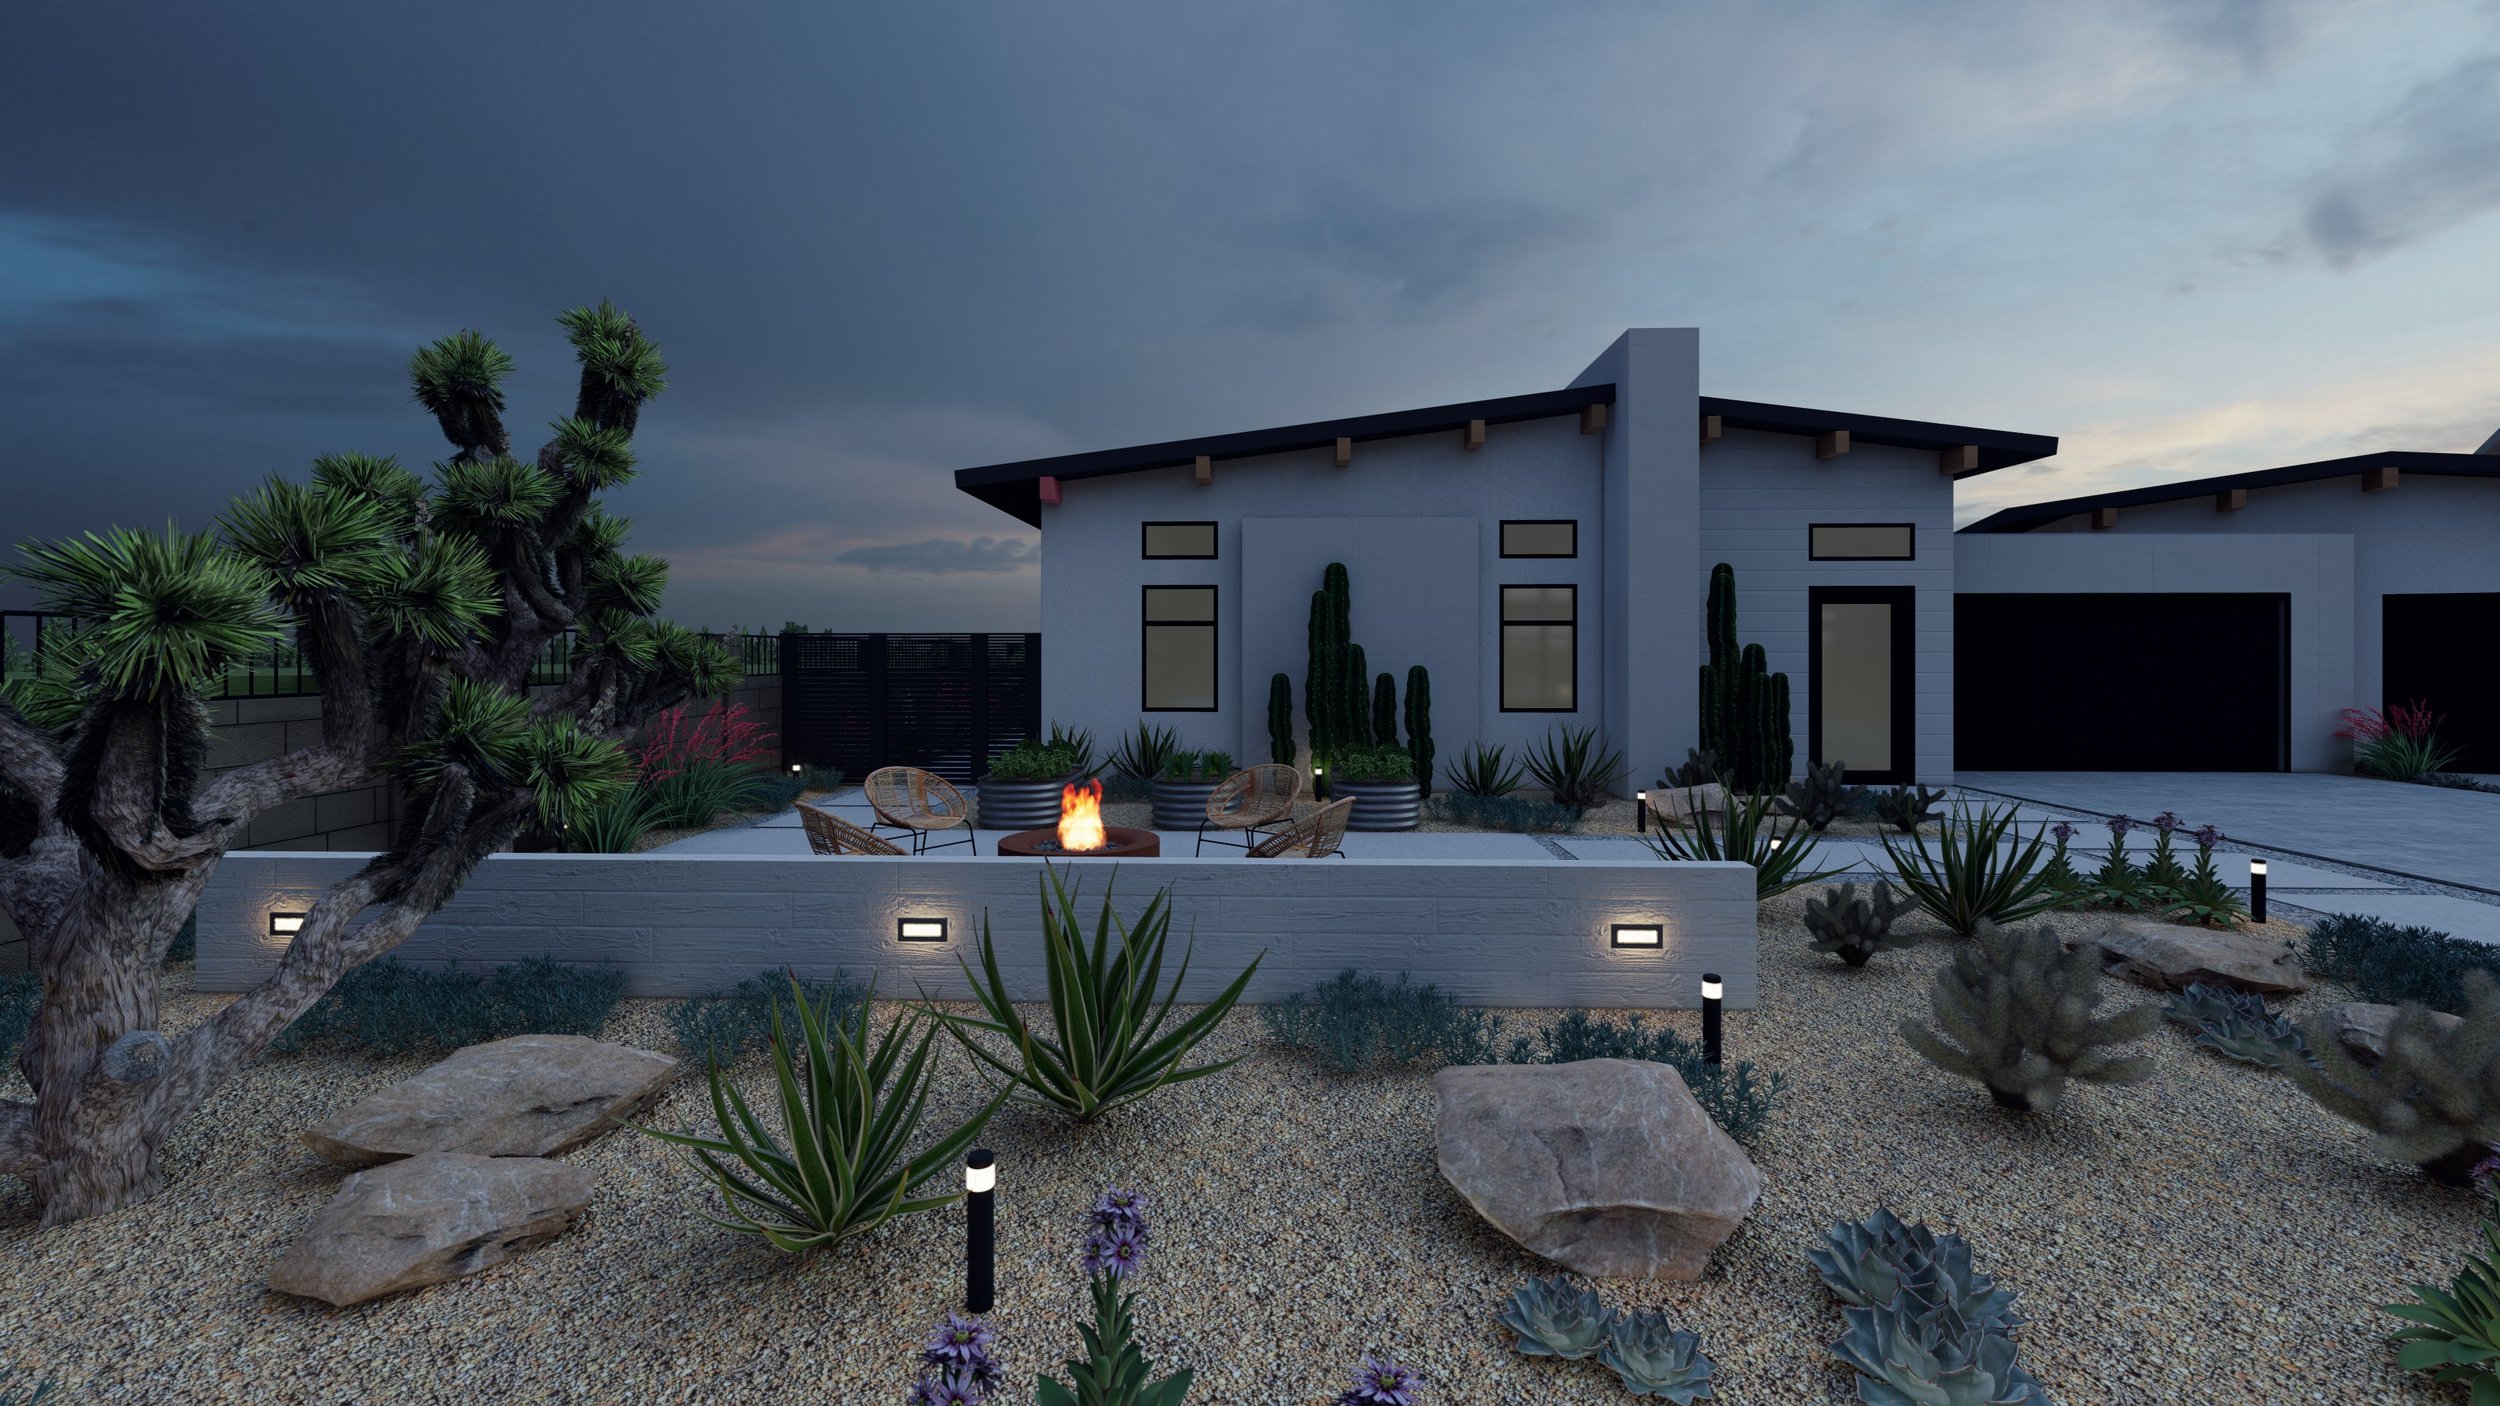 Recessed wall lights and minimalist black path lights spread like a constellation across this desert landscape design.